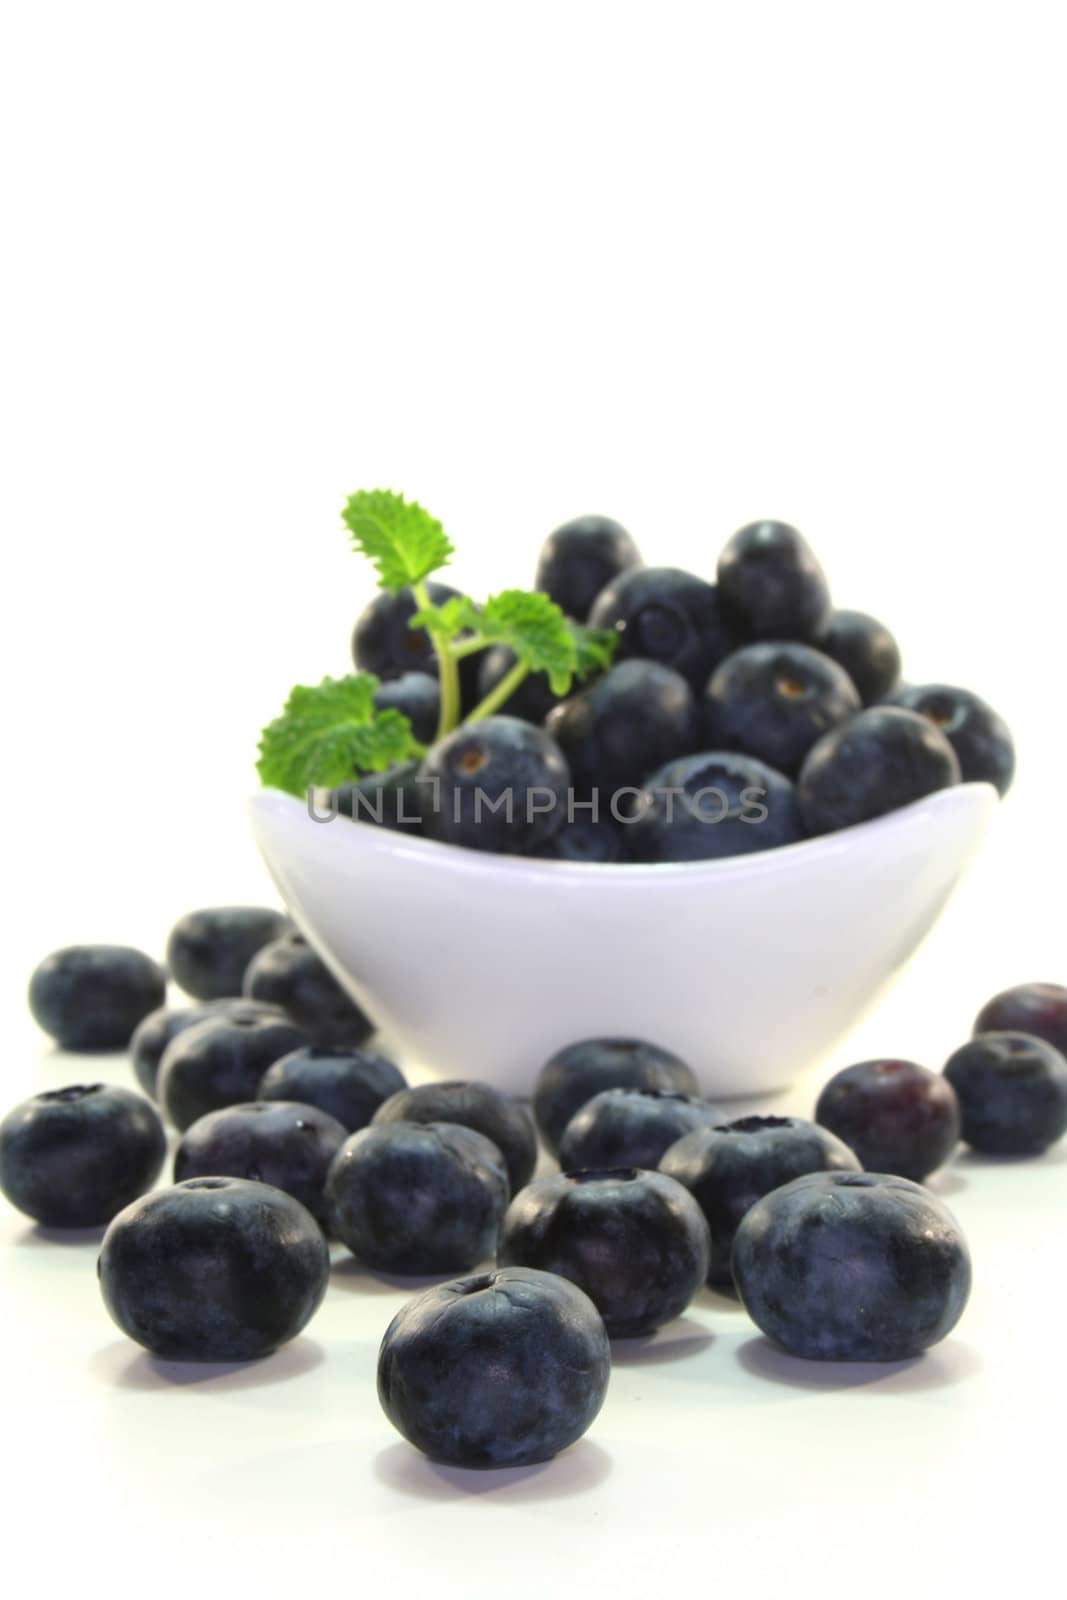 Blueberries in a small bowl on a white background